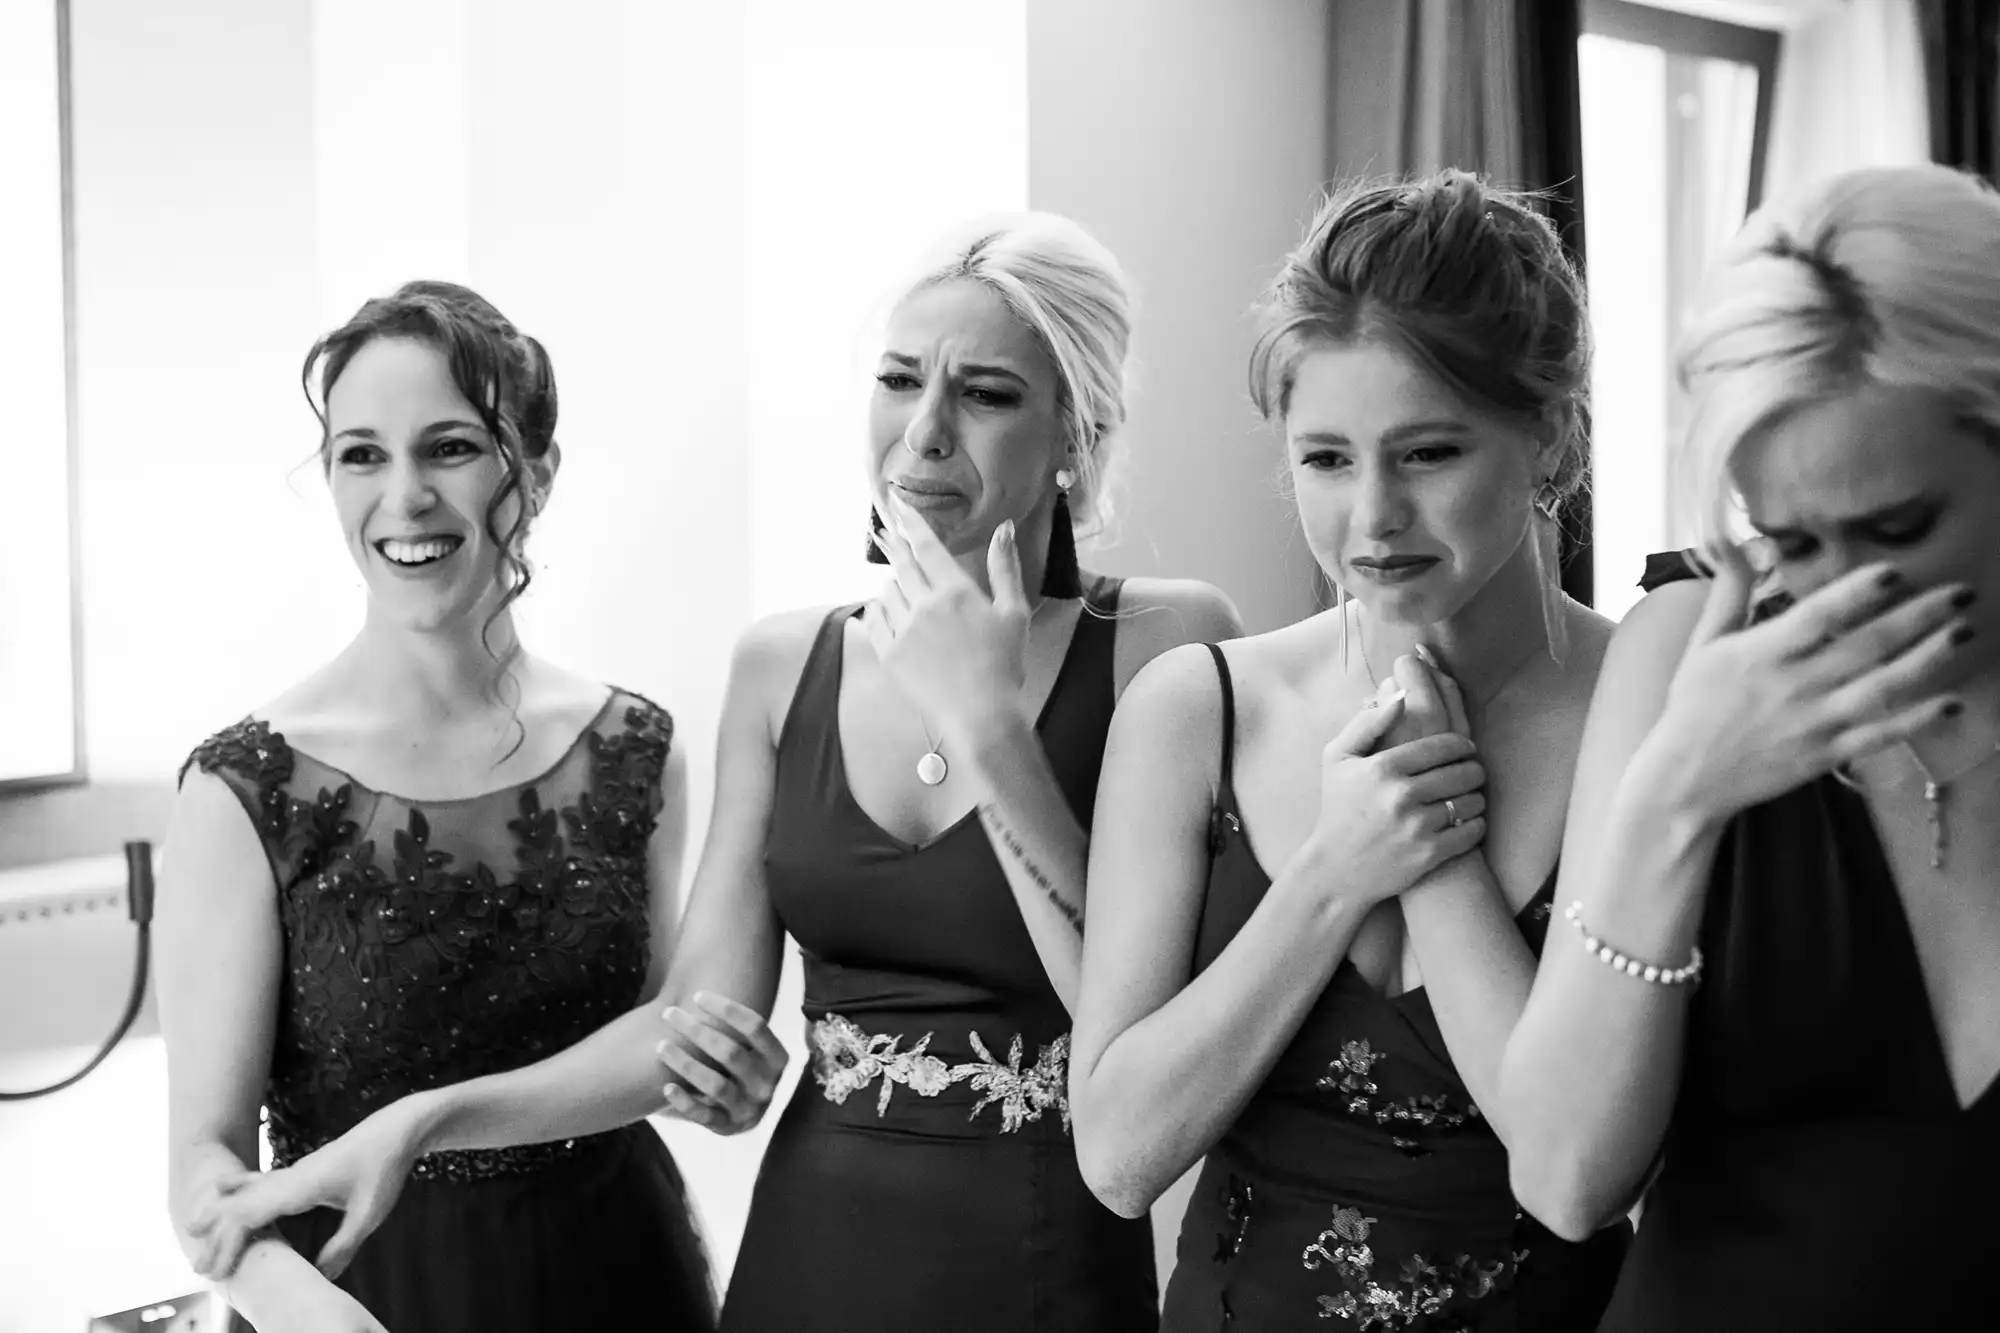 Four women stand close together; dressed in formal attire, three appear emotional, and one smiles. The scene is indoors, with natural light from a window.